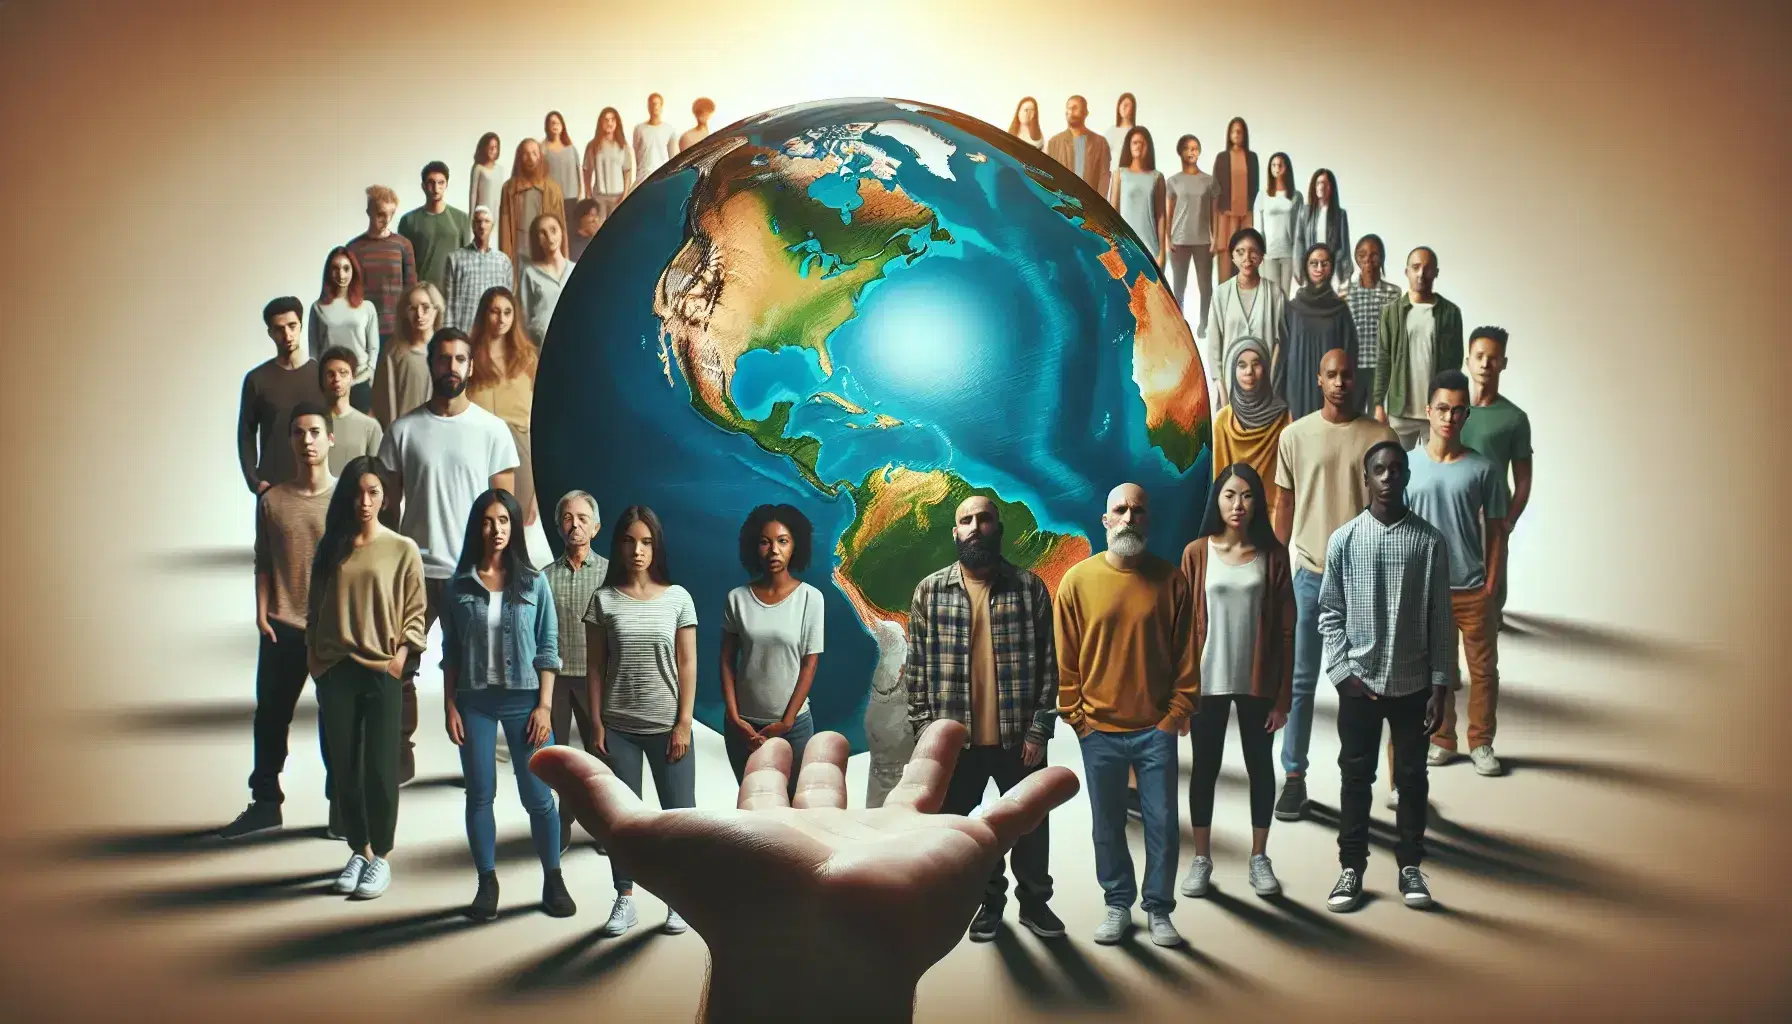 Diverse group of individuals in a semi-circle around a globe, focused on collaboration, with an outstretched hand in the foreground, against a blurred backdrop.